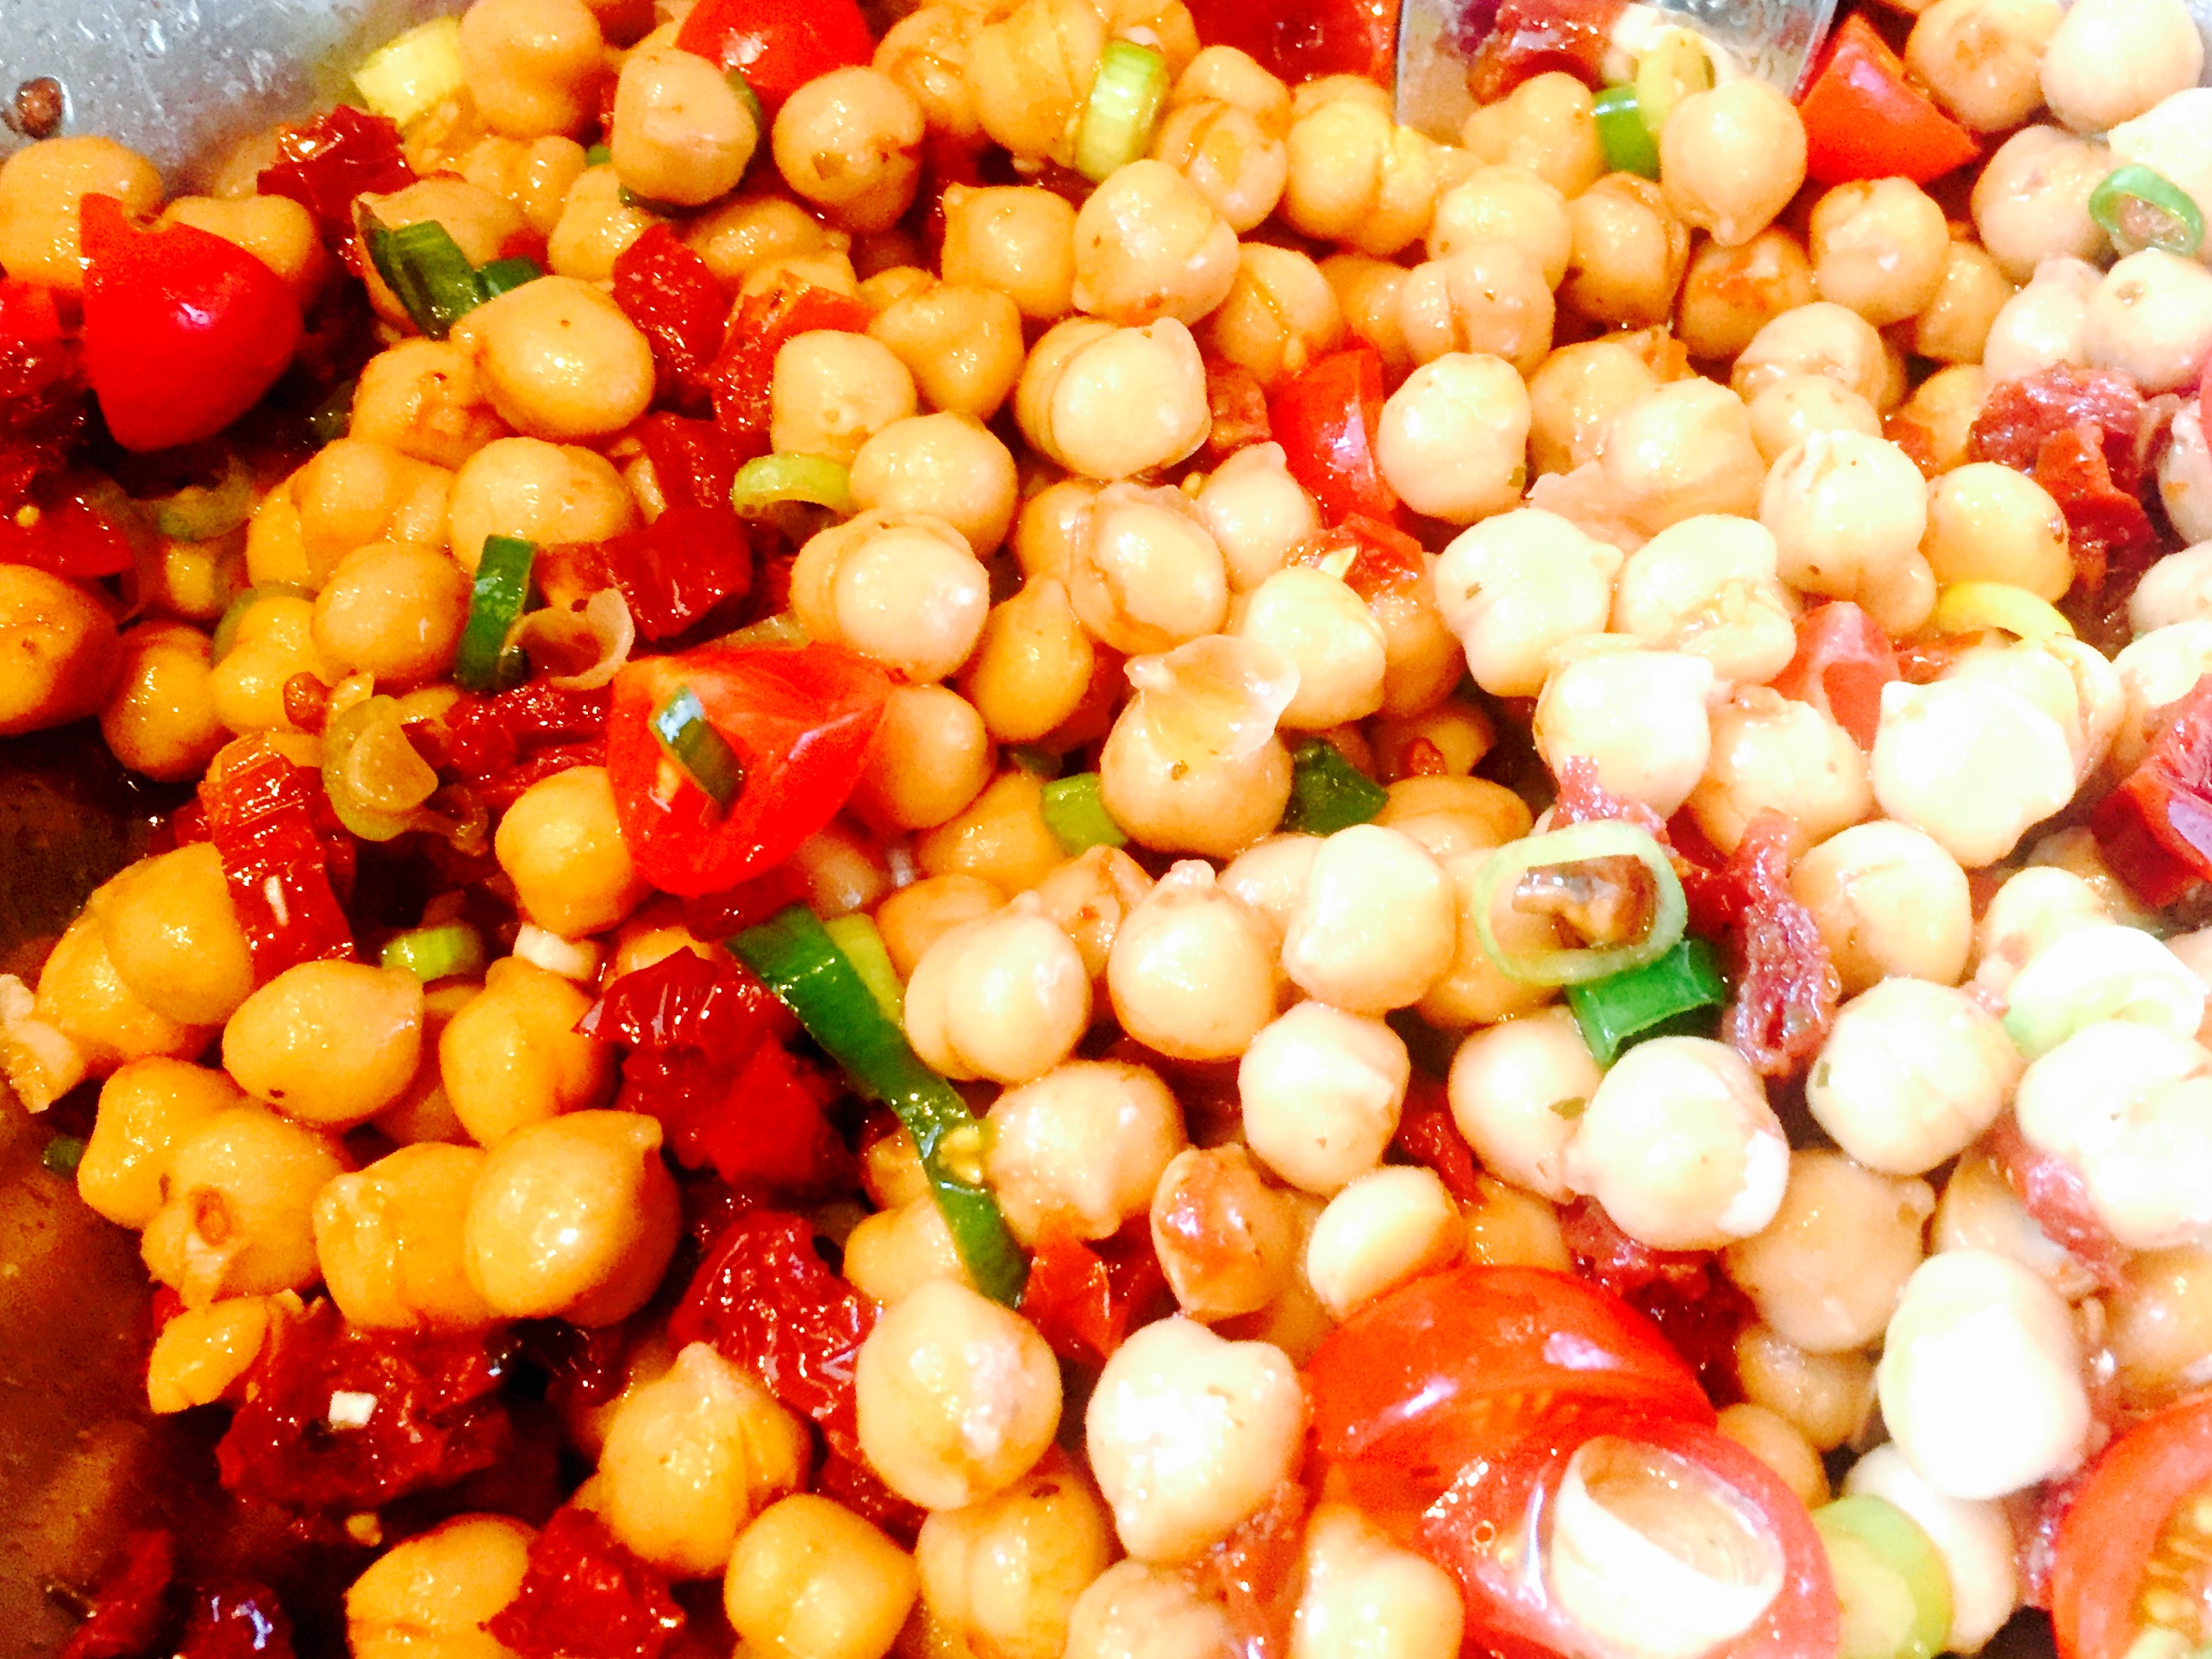 Delicious chickpea salad, comes together quickly and is simply delicious